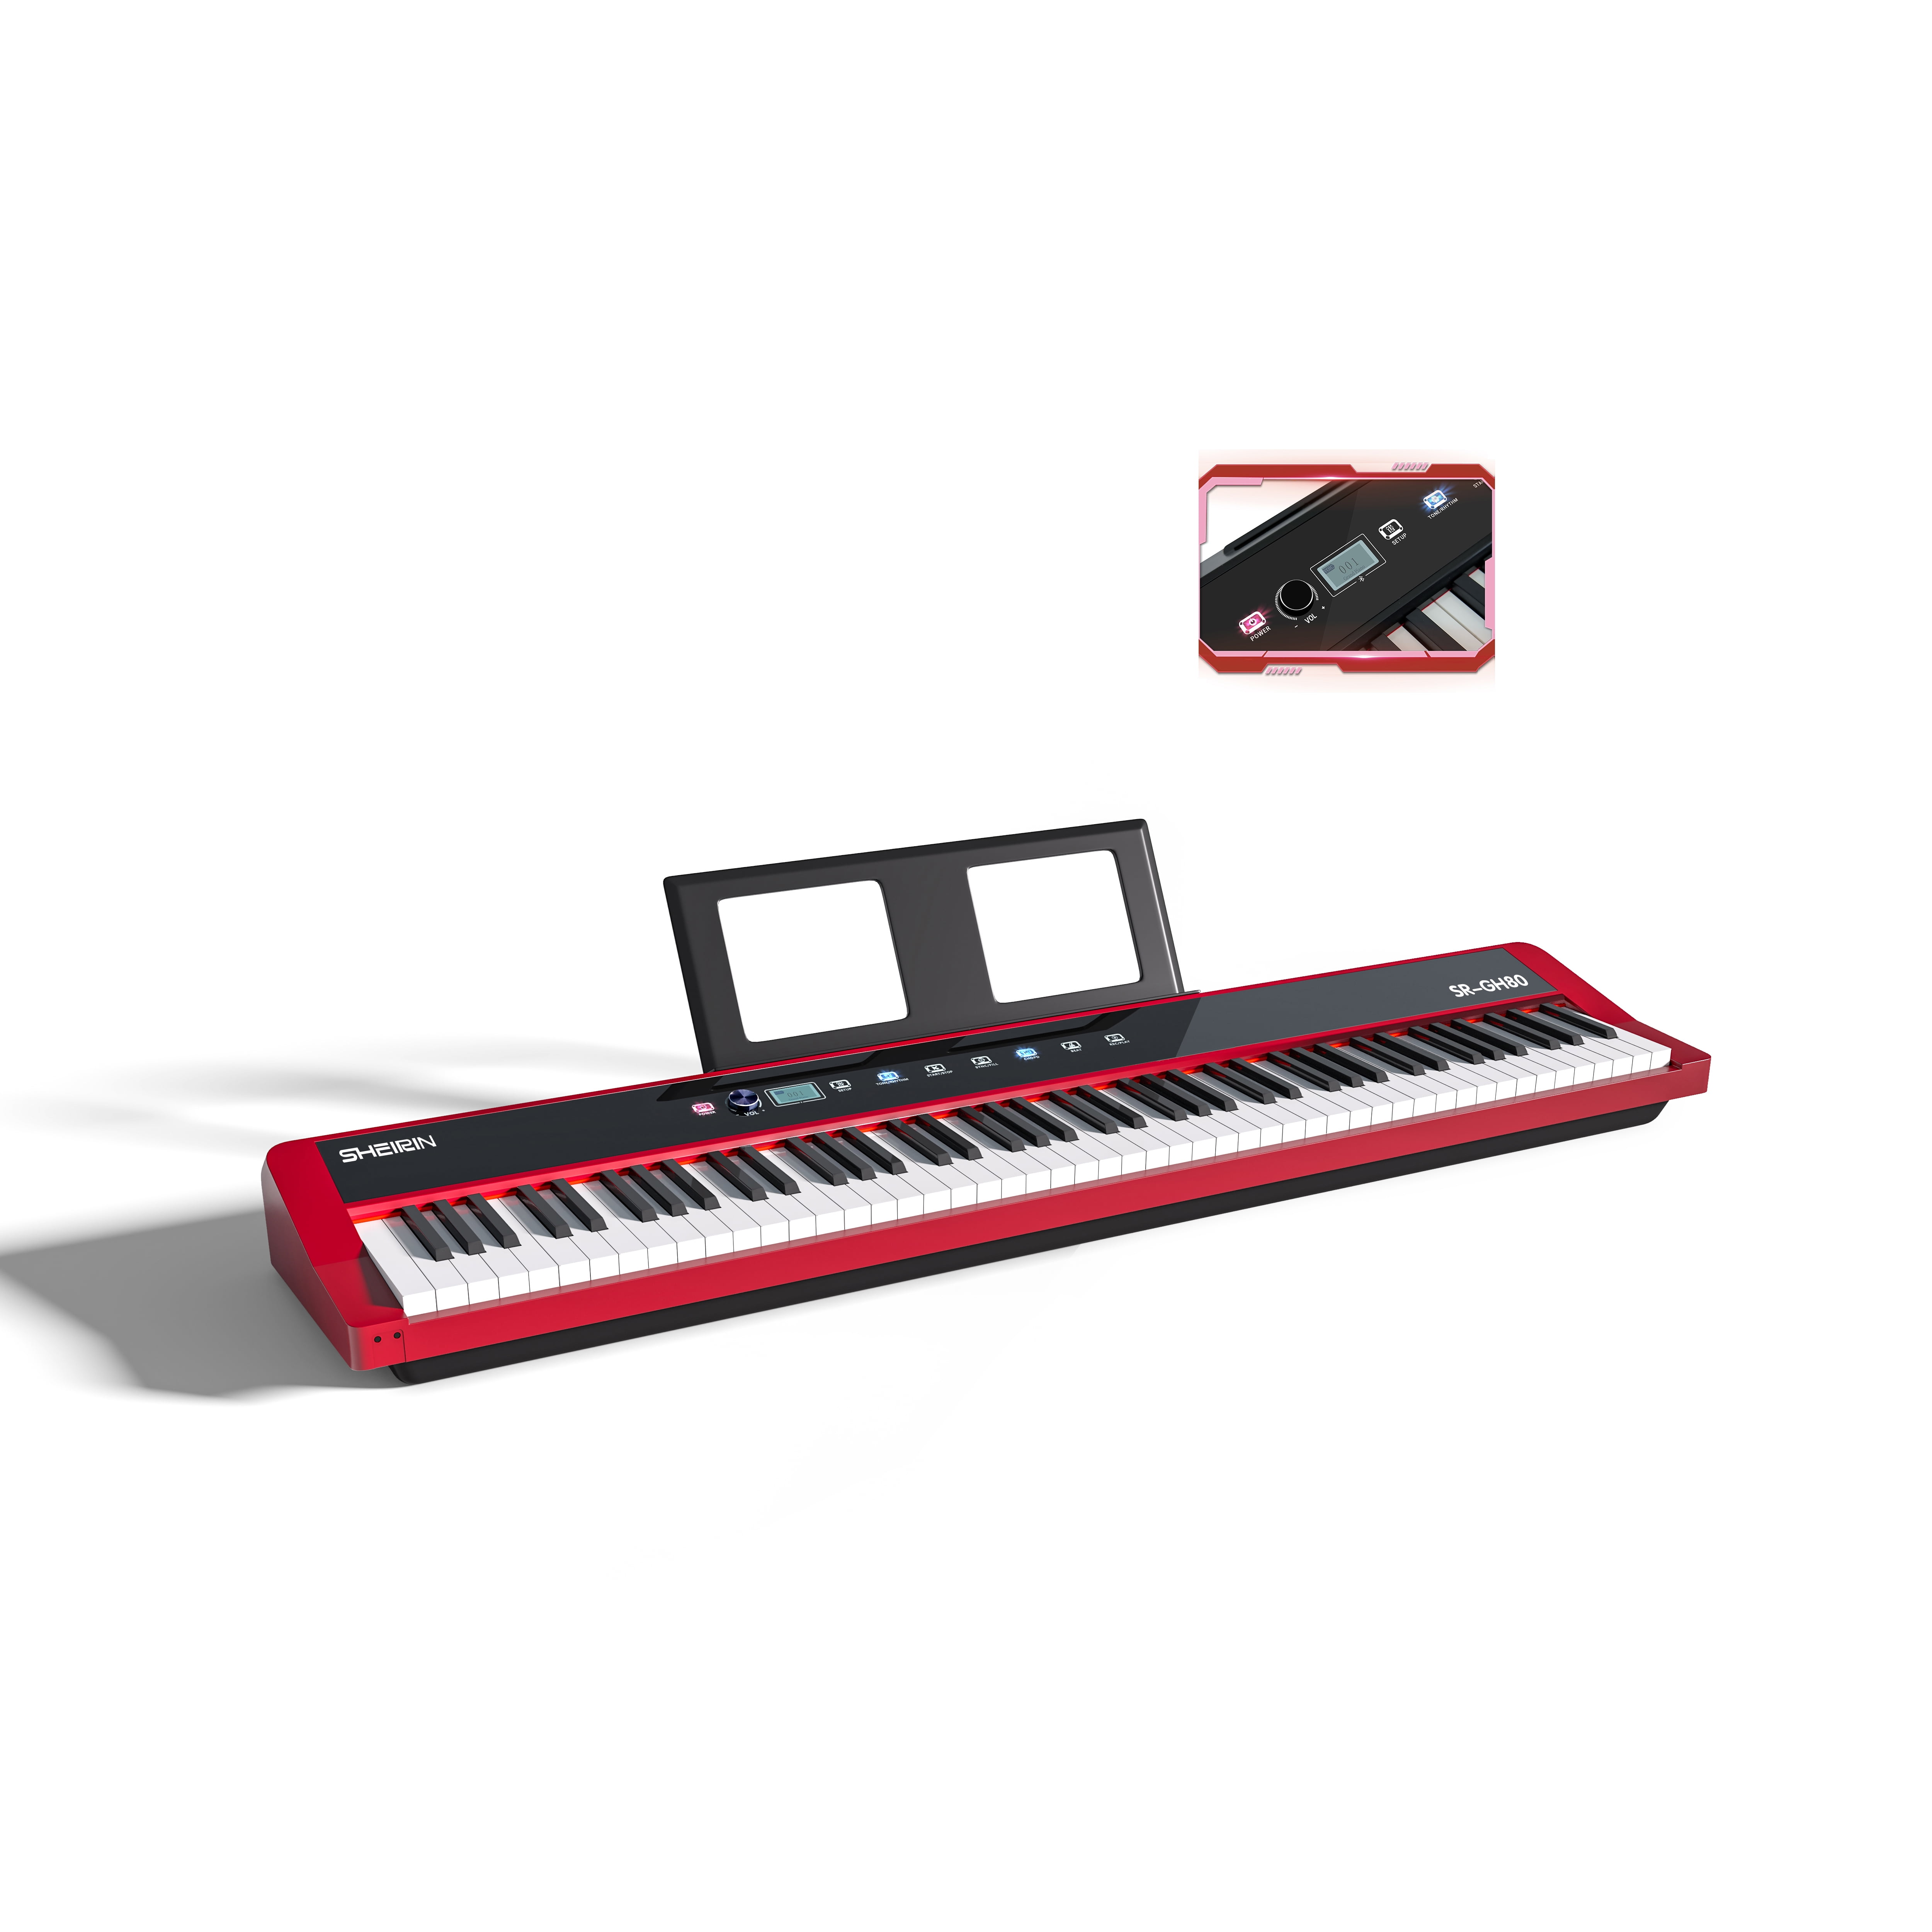 SHEIRIN Digital Piano 88 Keys Weighted Keyboard Touch Screen Bags Beginners  Portable SR-GH80(Red)